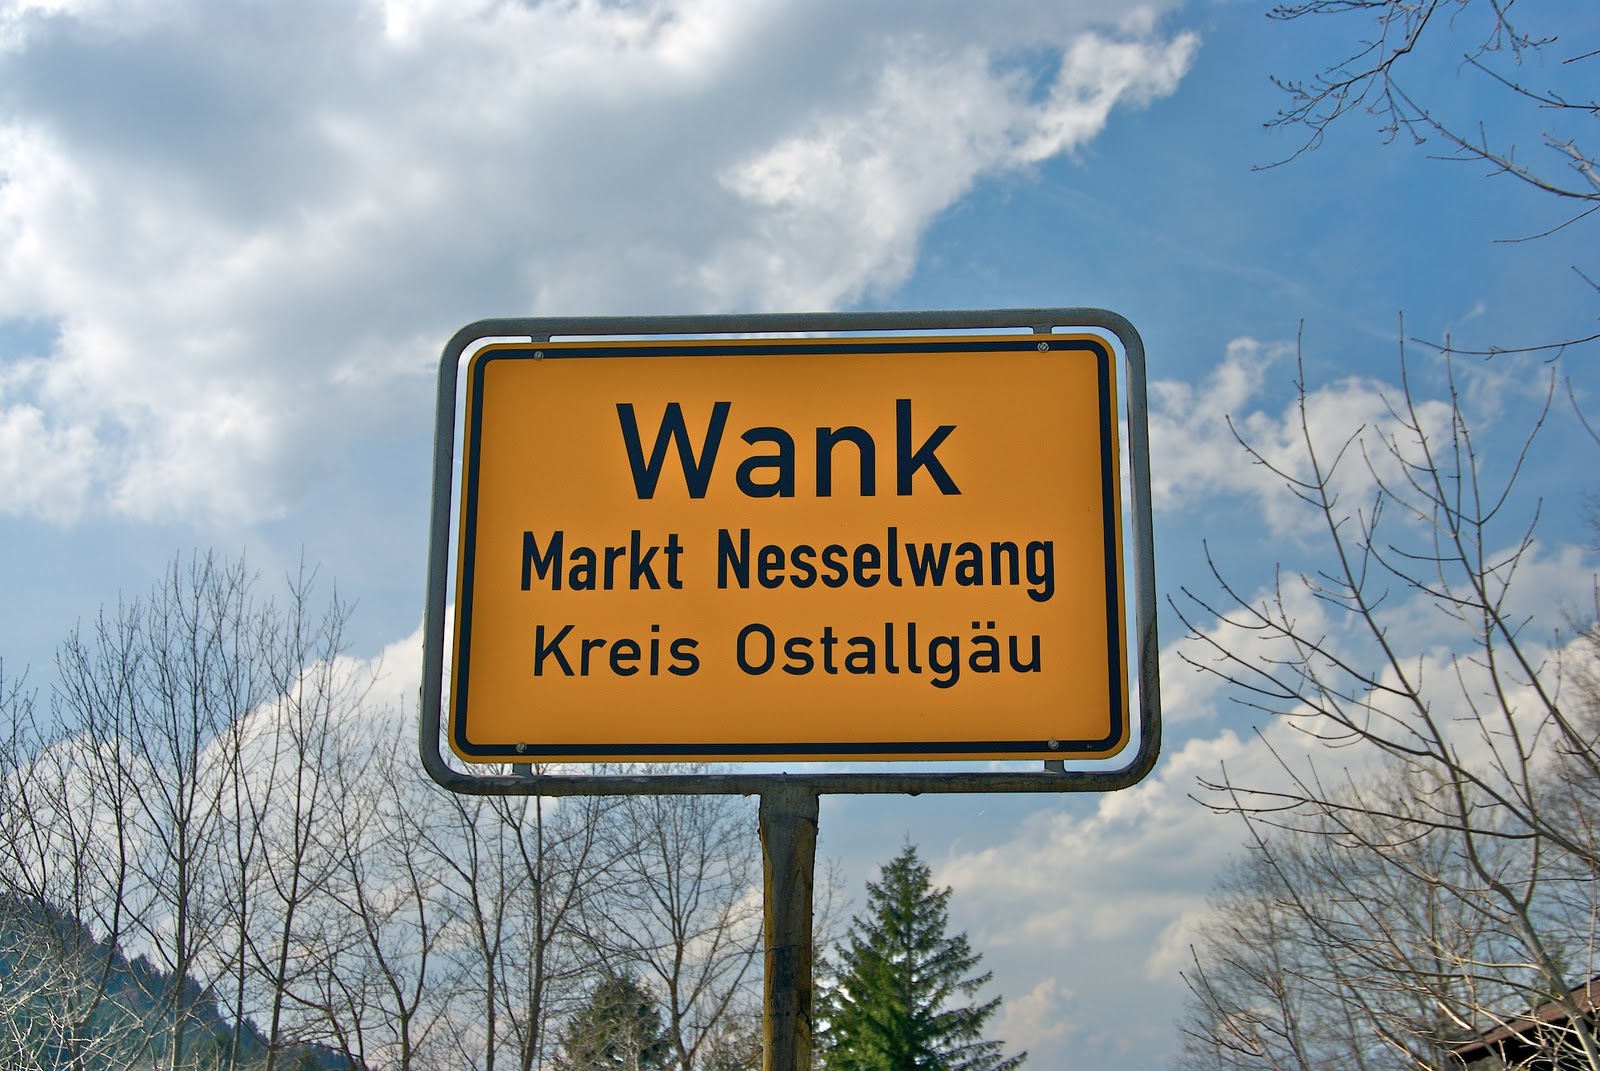 The Most Stolen and Hilarious Road Signs From Around the World -  Joyenergizer